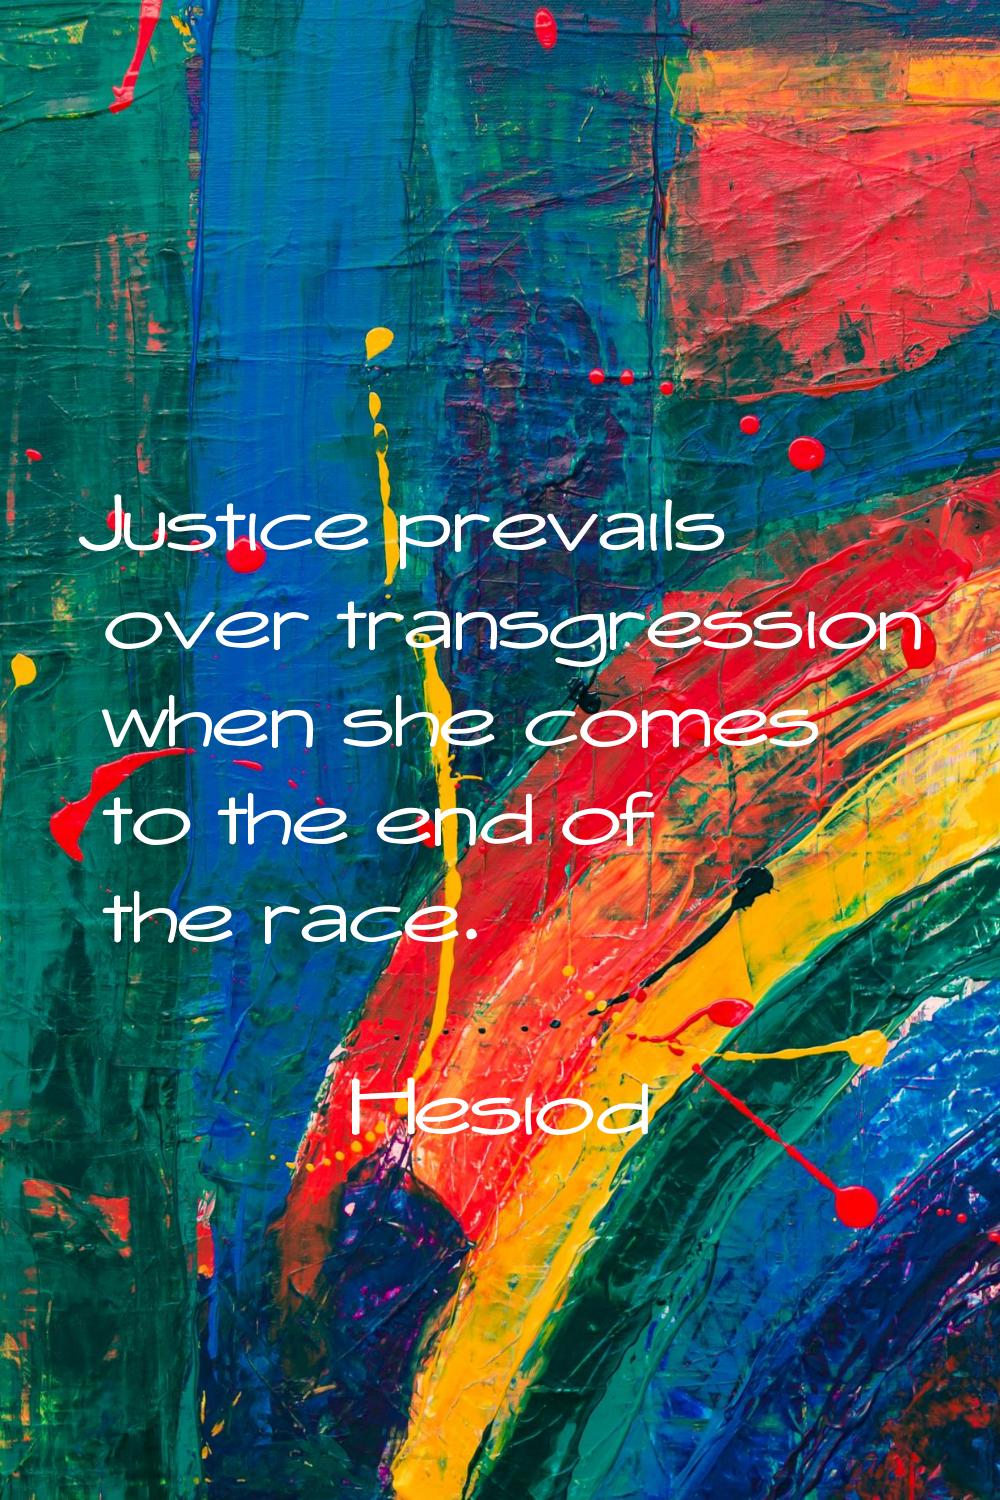 Justice prevails over transgression when she comes to the end of the race.